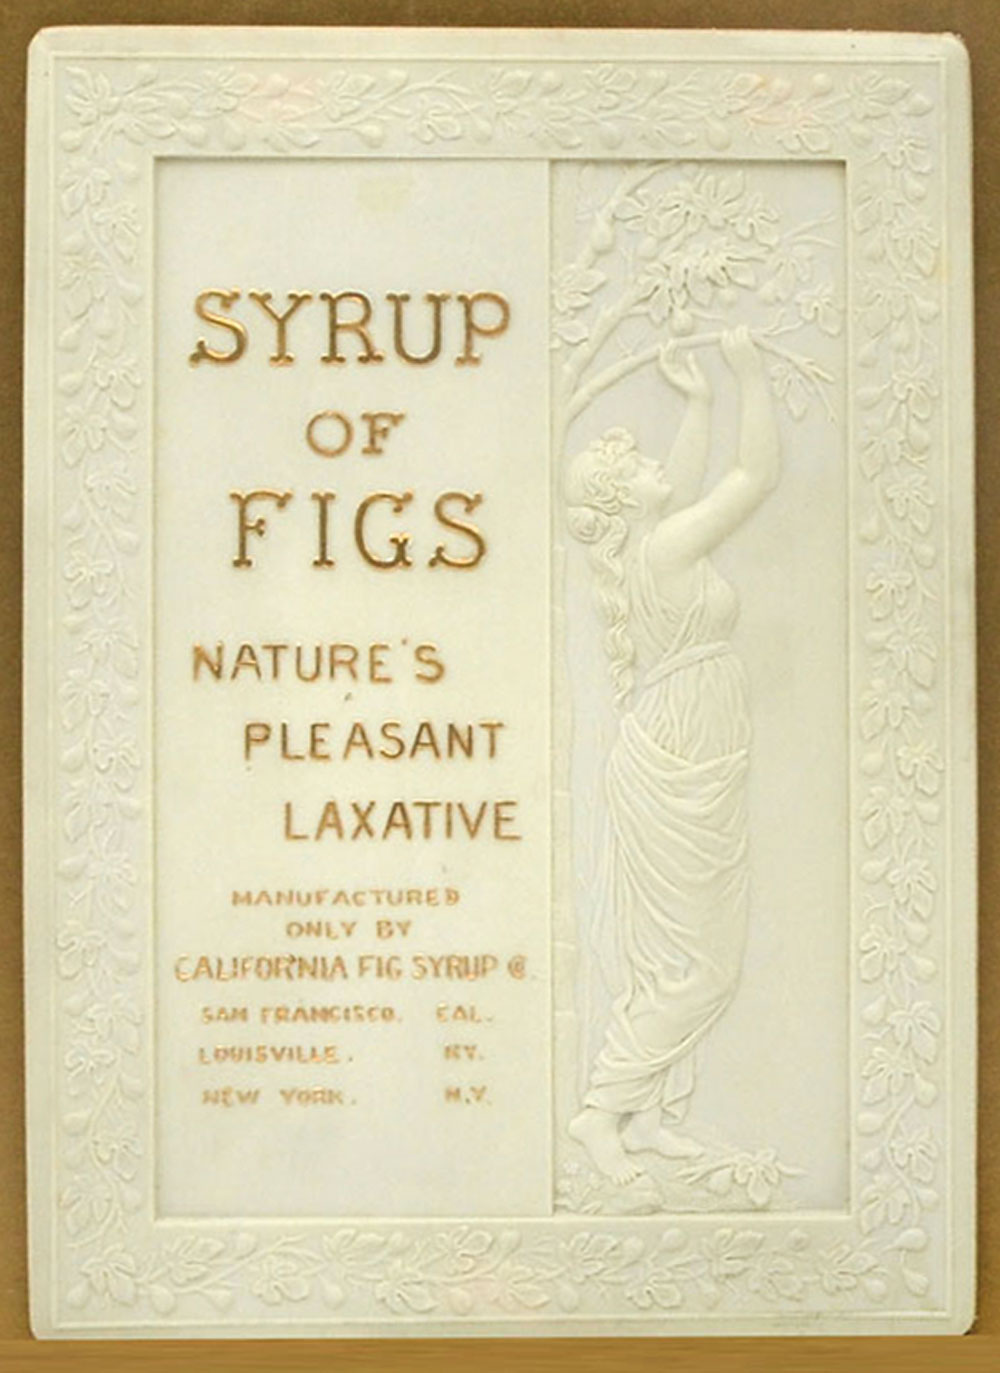 SYRUP OF FIGS ADVERTISEMENT BY 36f364